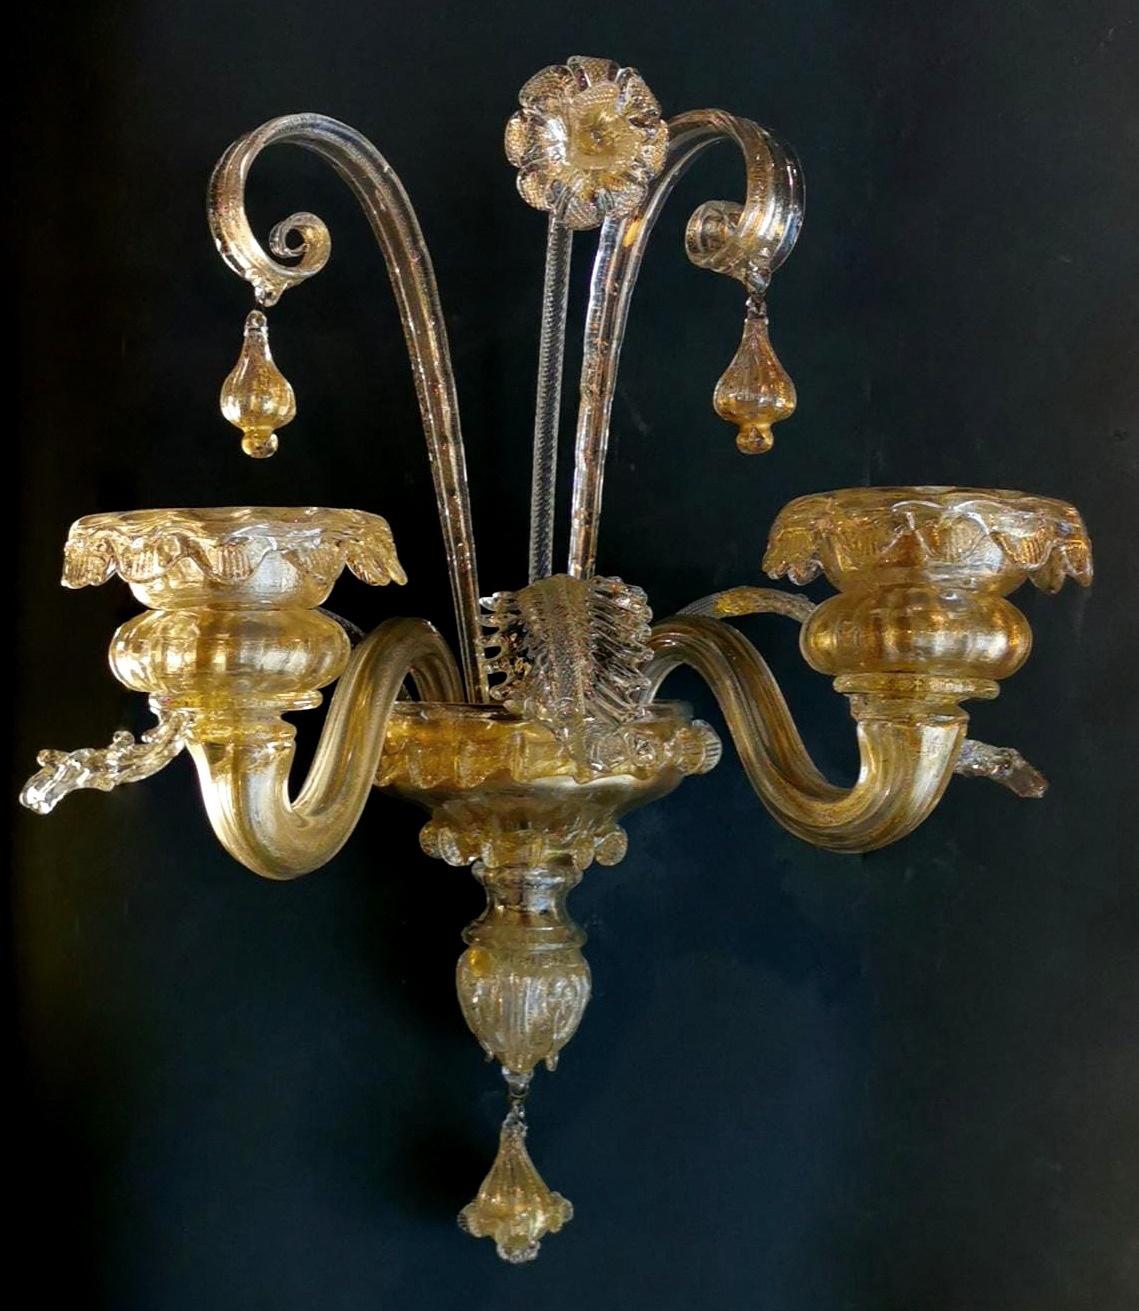 We kindly suggest that you read the whole description, as with it we try to give you detailed technical and historical information to guarantee the authenticity of our objects.
Valuable and precious Murano glass wall sconce made in a graceful Art